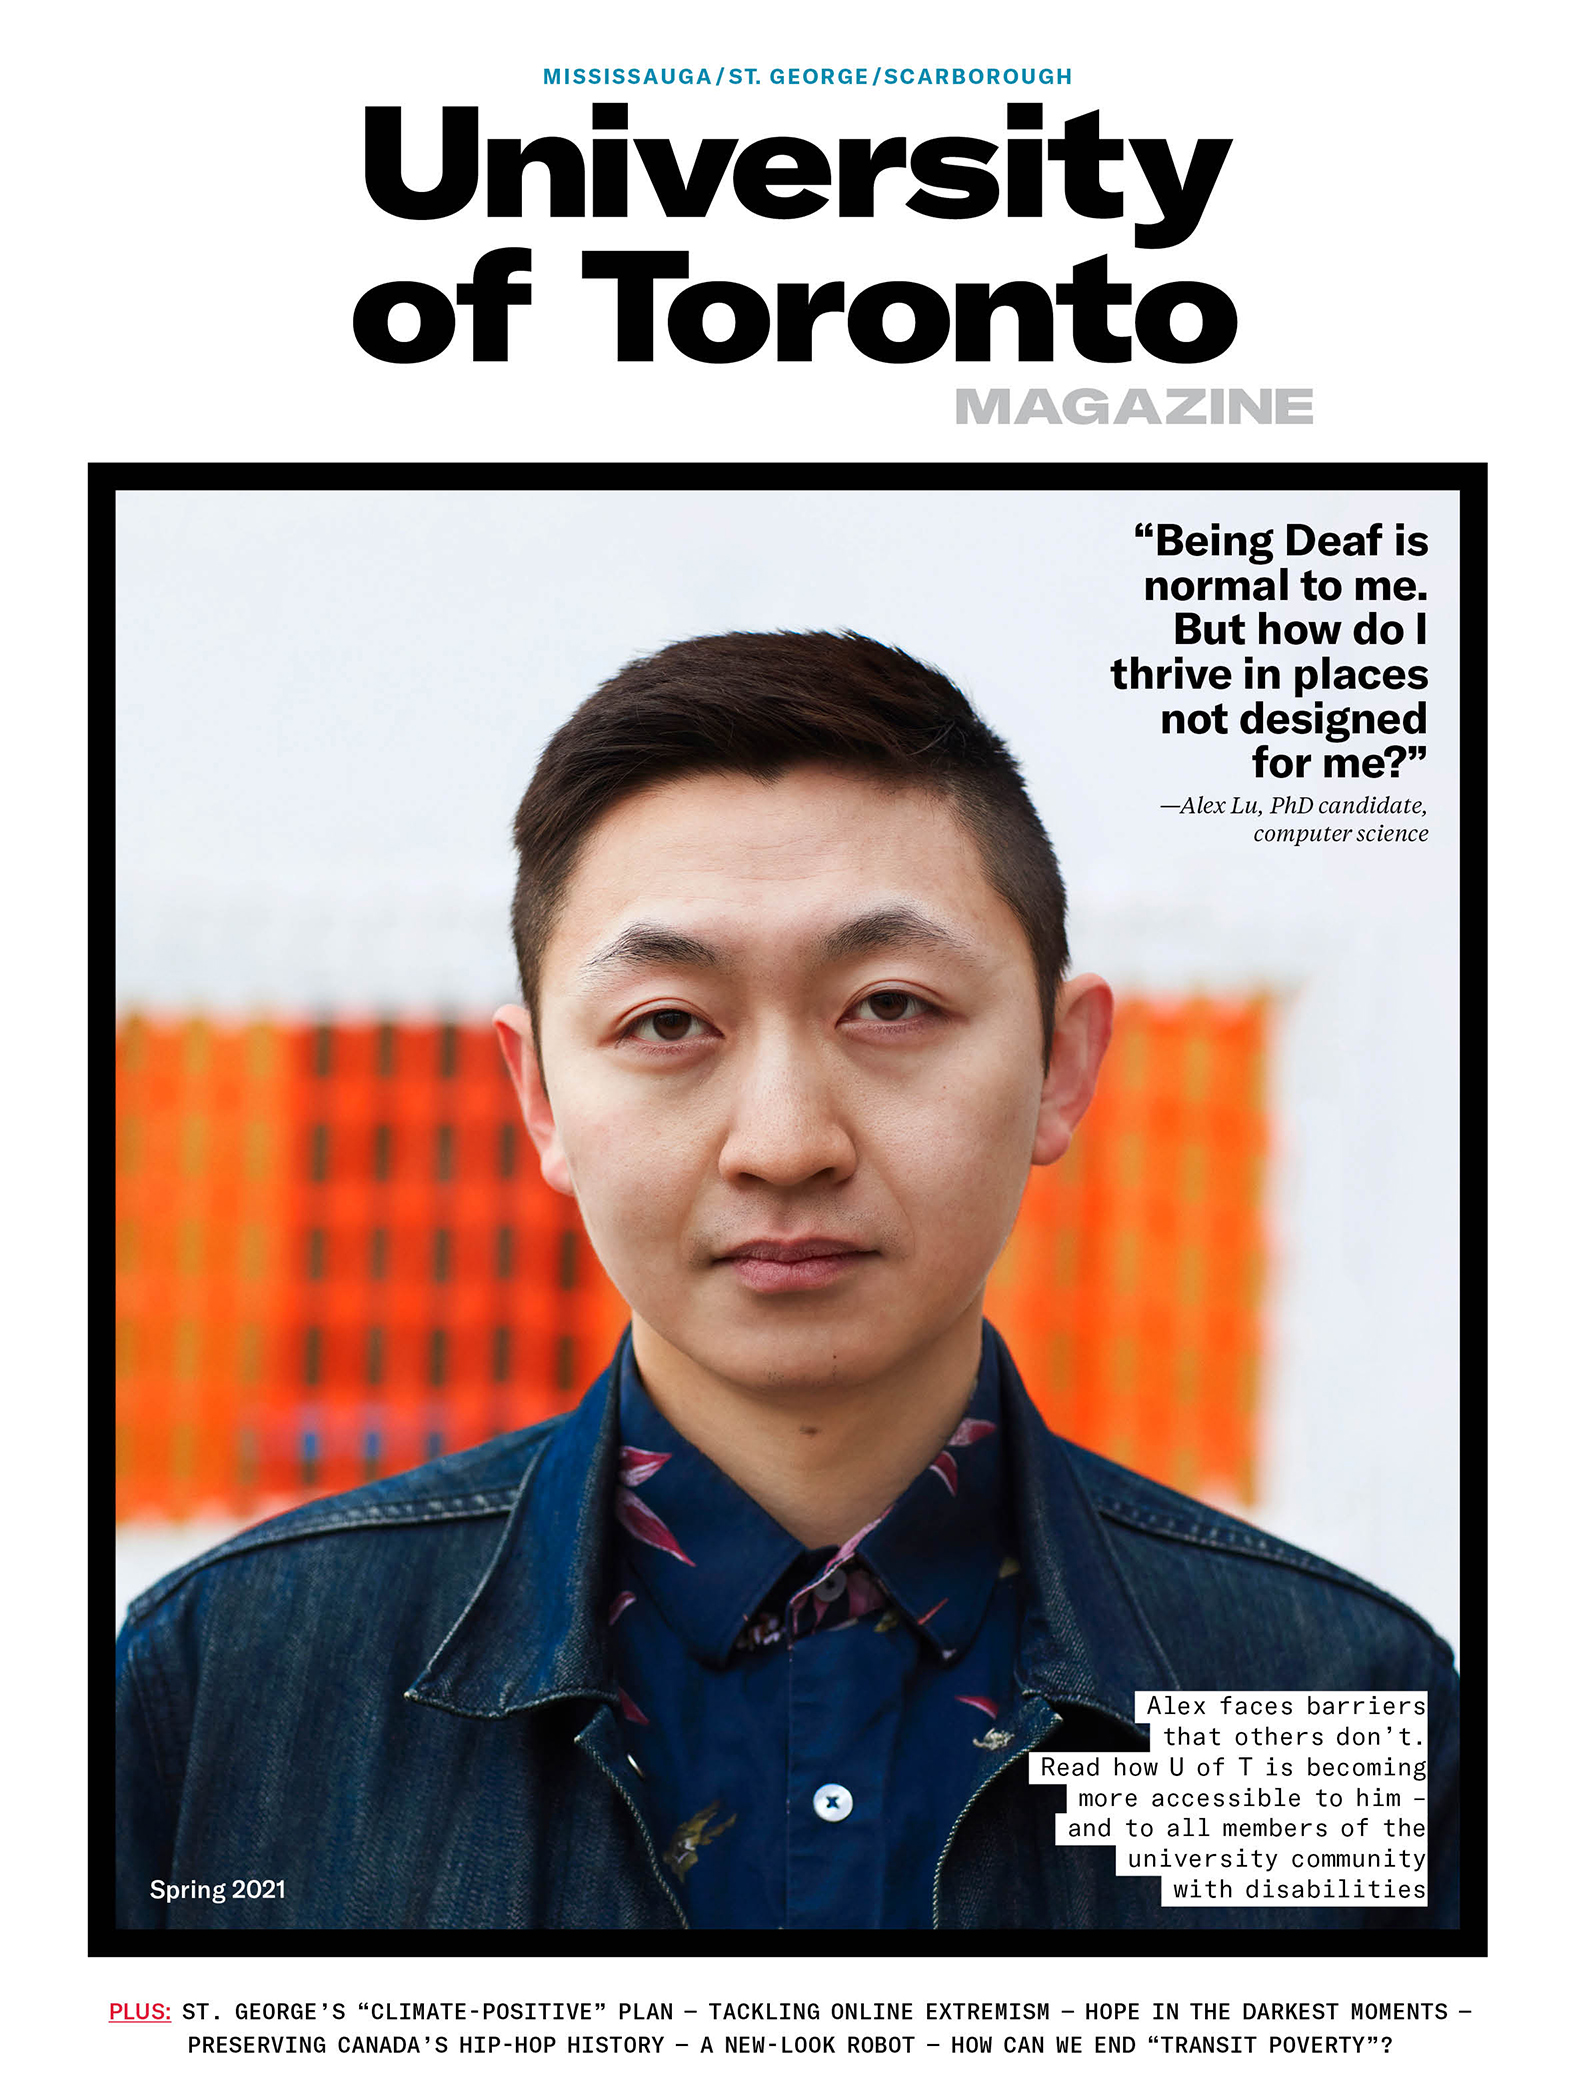 Cover page of University of Toronto Magazine Spring 2021 issue